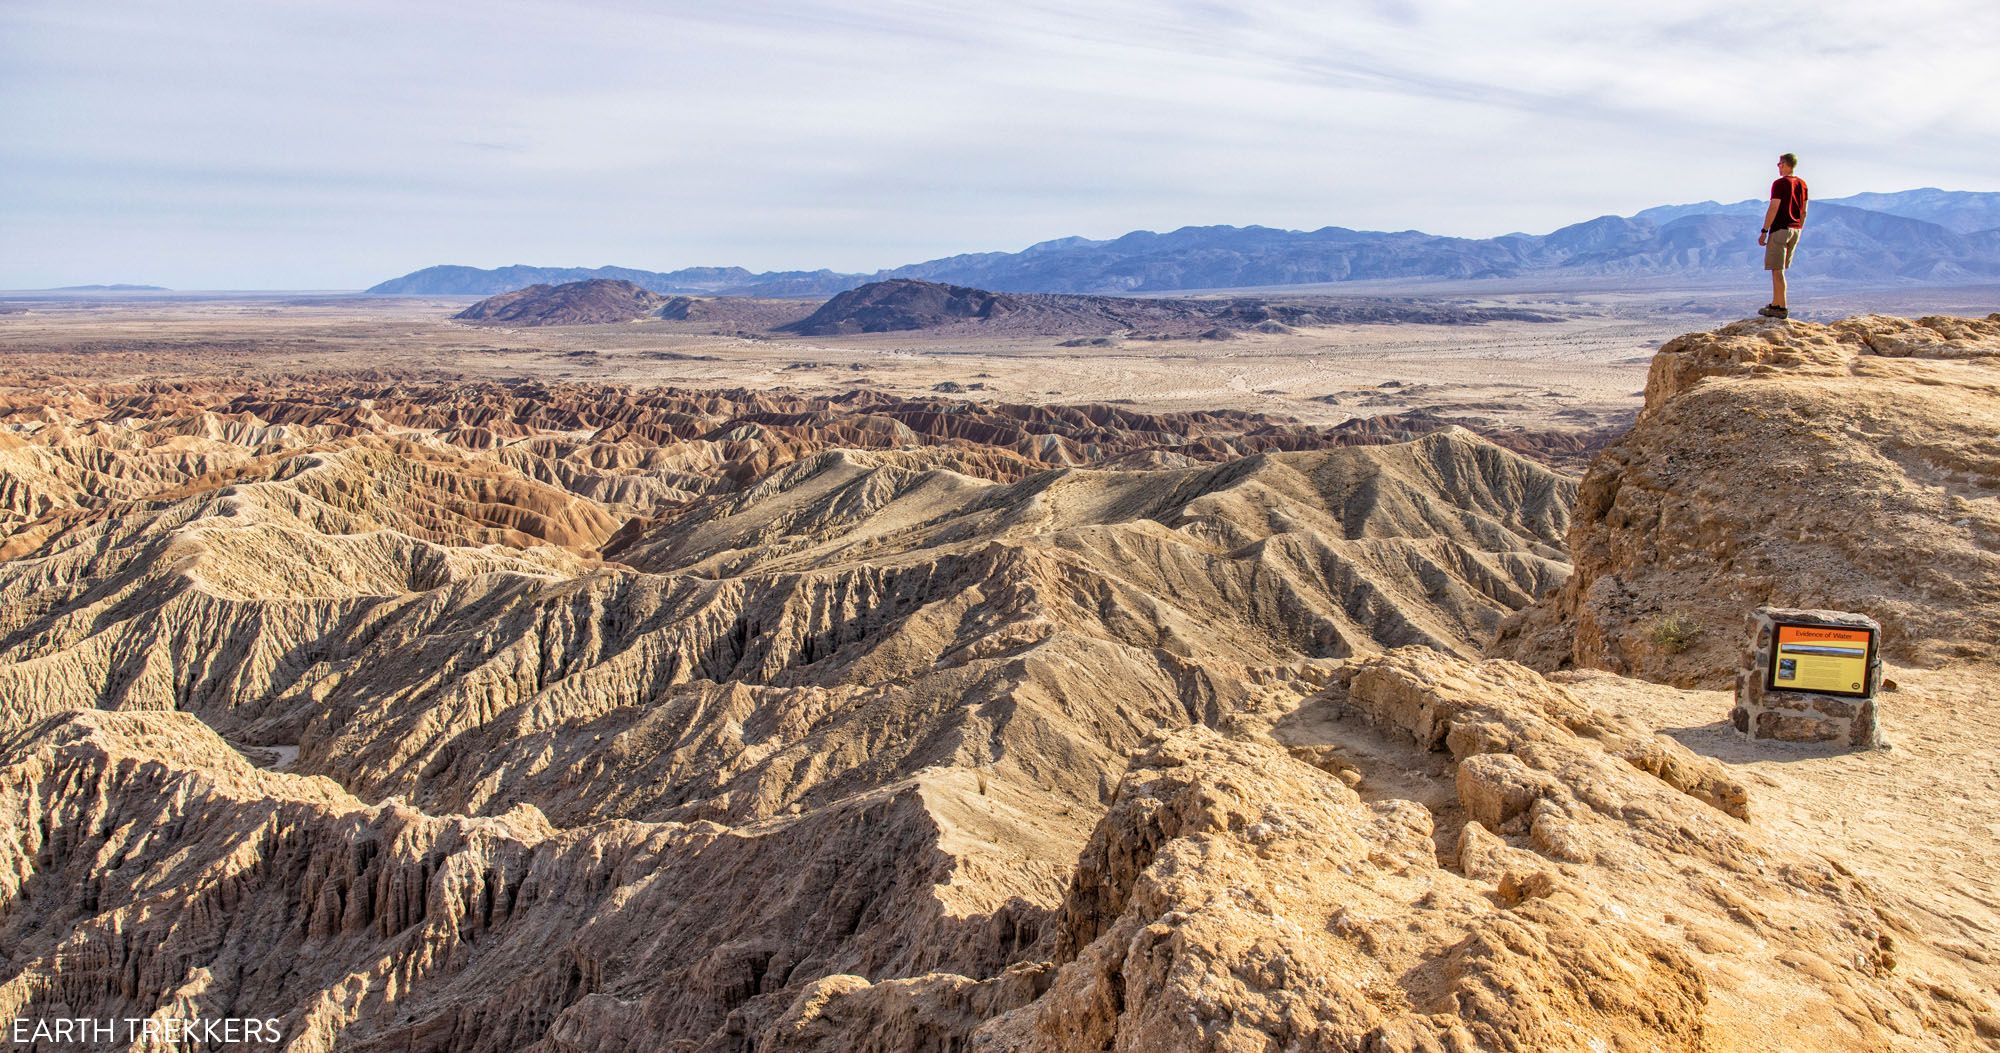 Featured image for “One Perfect Day in Anza-Borrego Desert State Park”